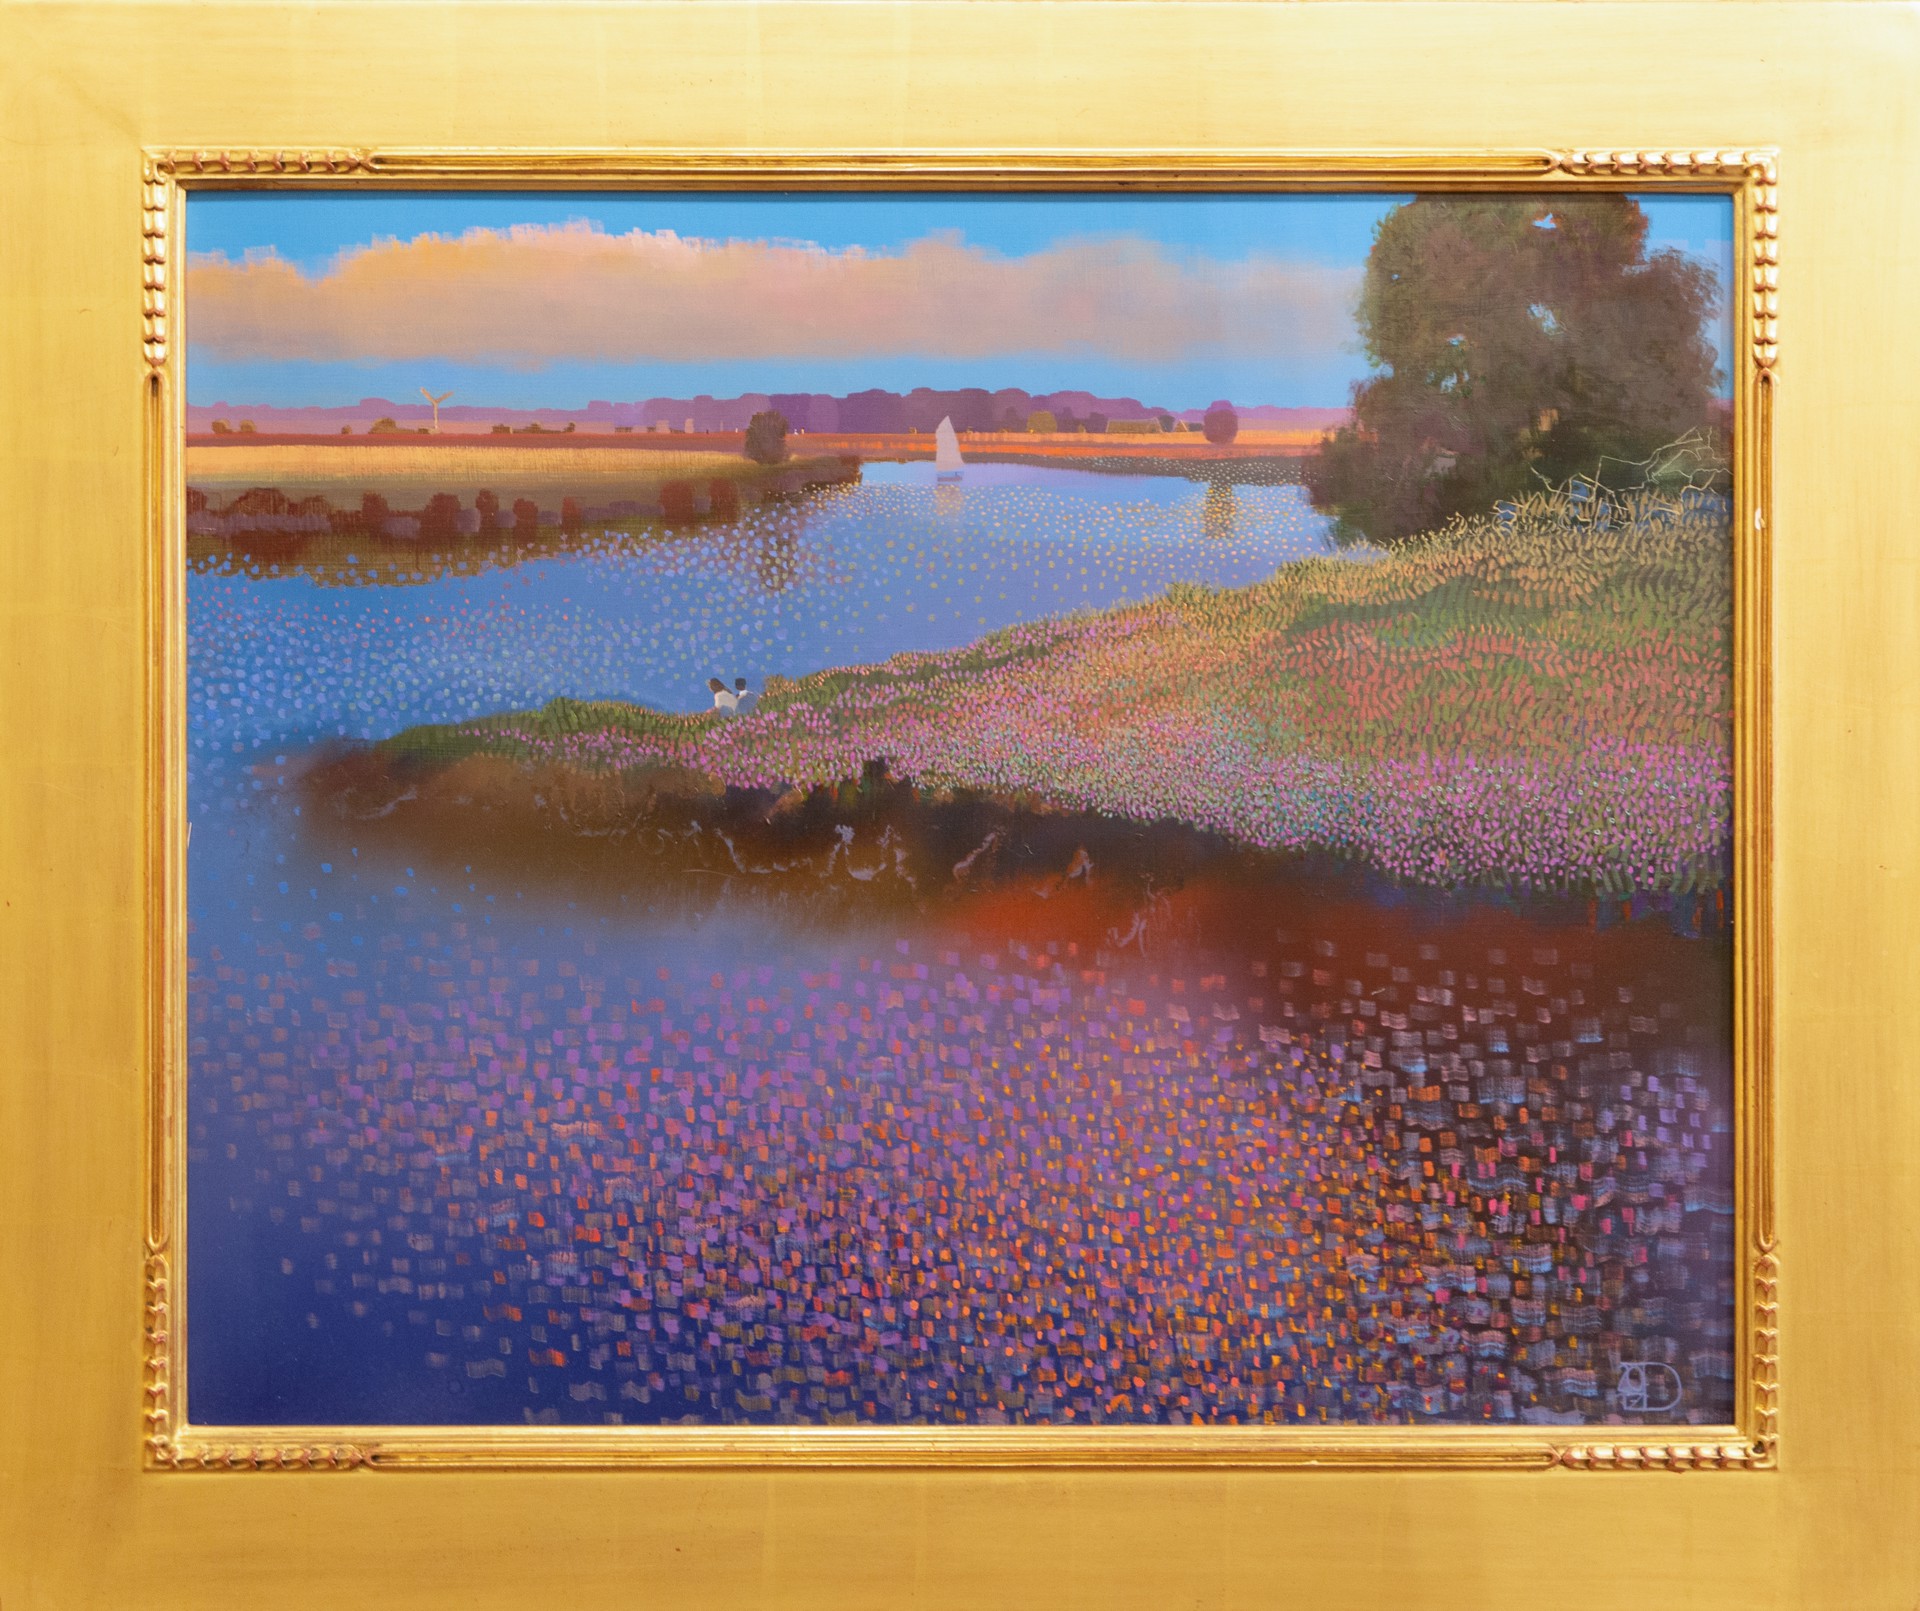 Afternoon Delight by Ton Dubbeldam